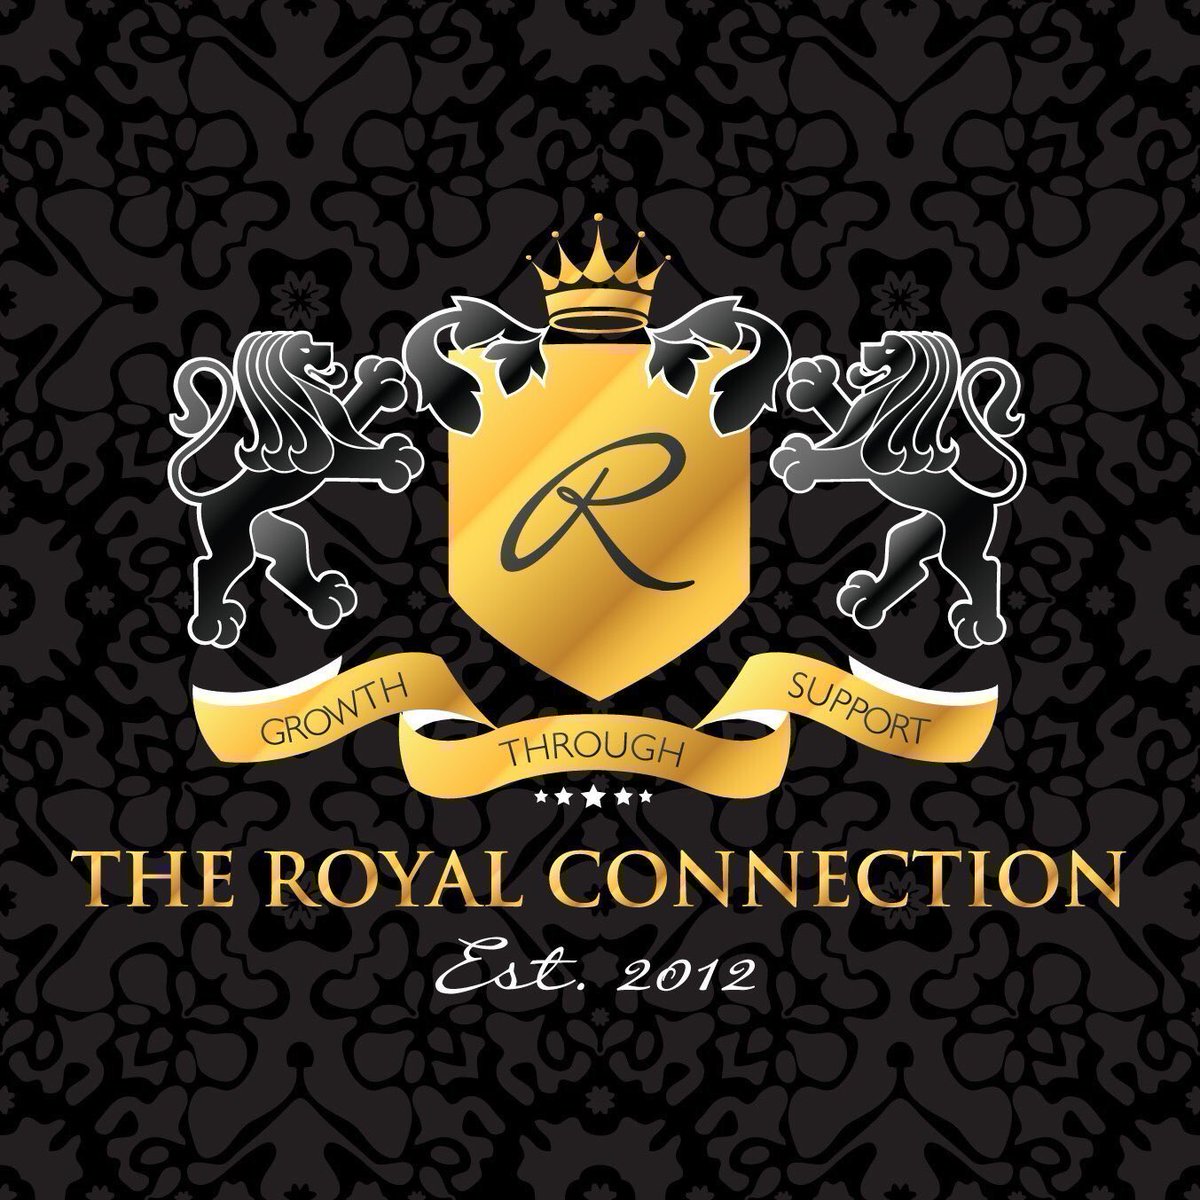 Be sure to support all the #smallbusiness that are @ADG_IQ #QueenOf, #KingOf and #MonarchOf winners in #Stockport 😊 #PromoteStockport #SBS #ShopIndie #BizBubble theroyalconnection.co.uk